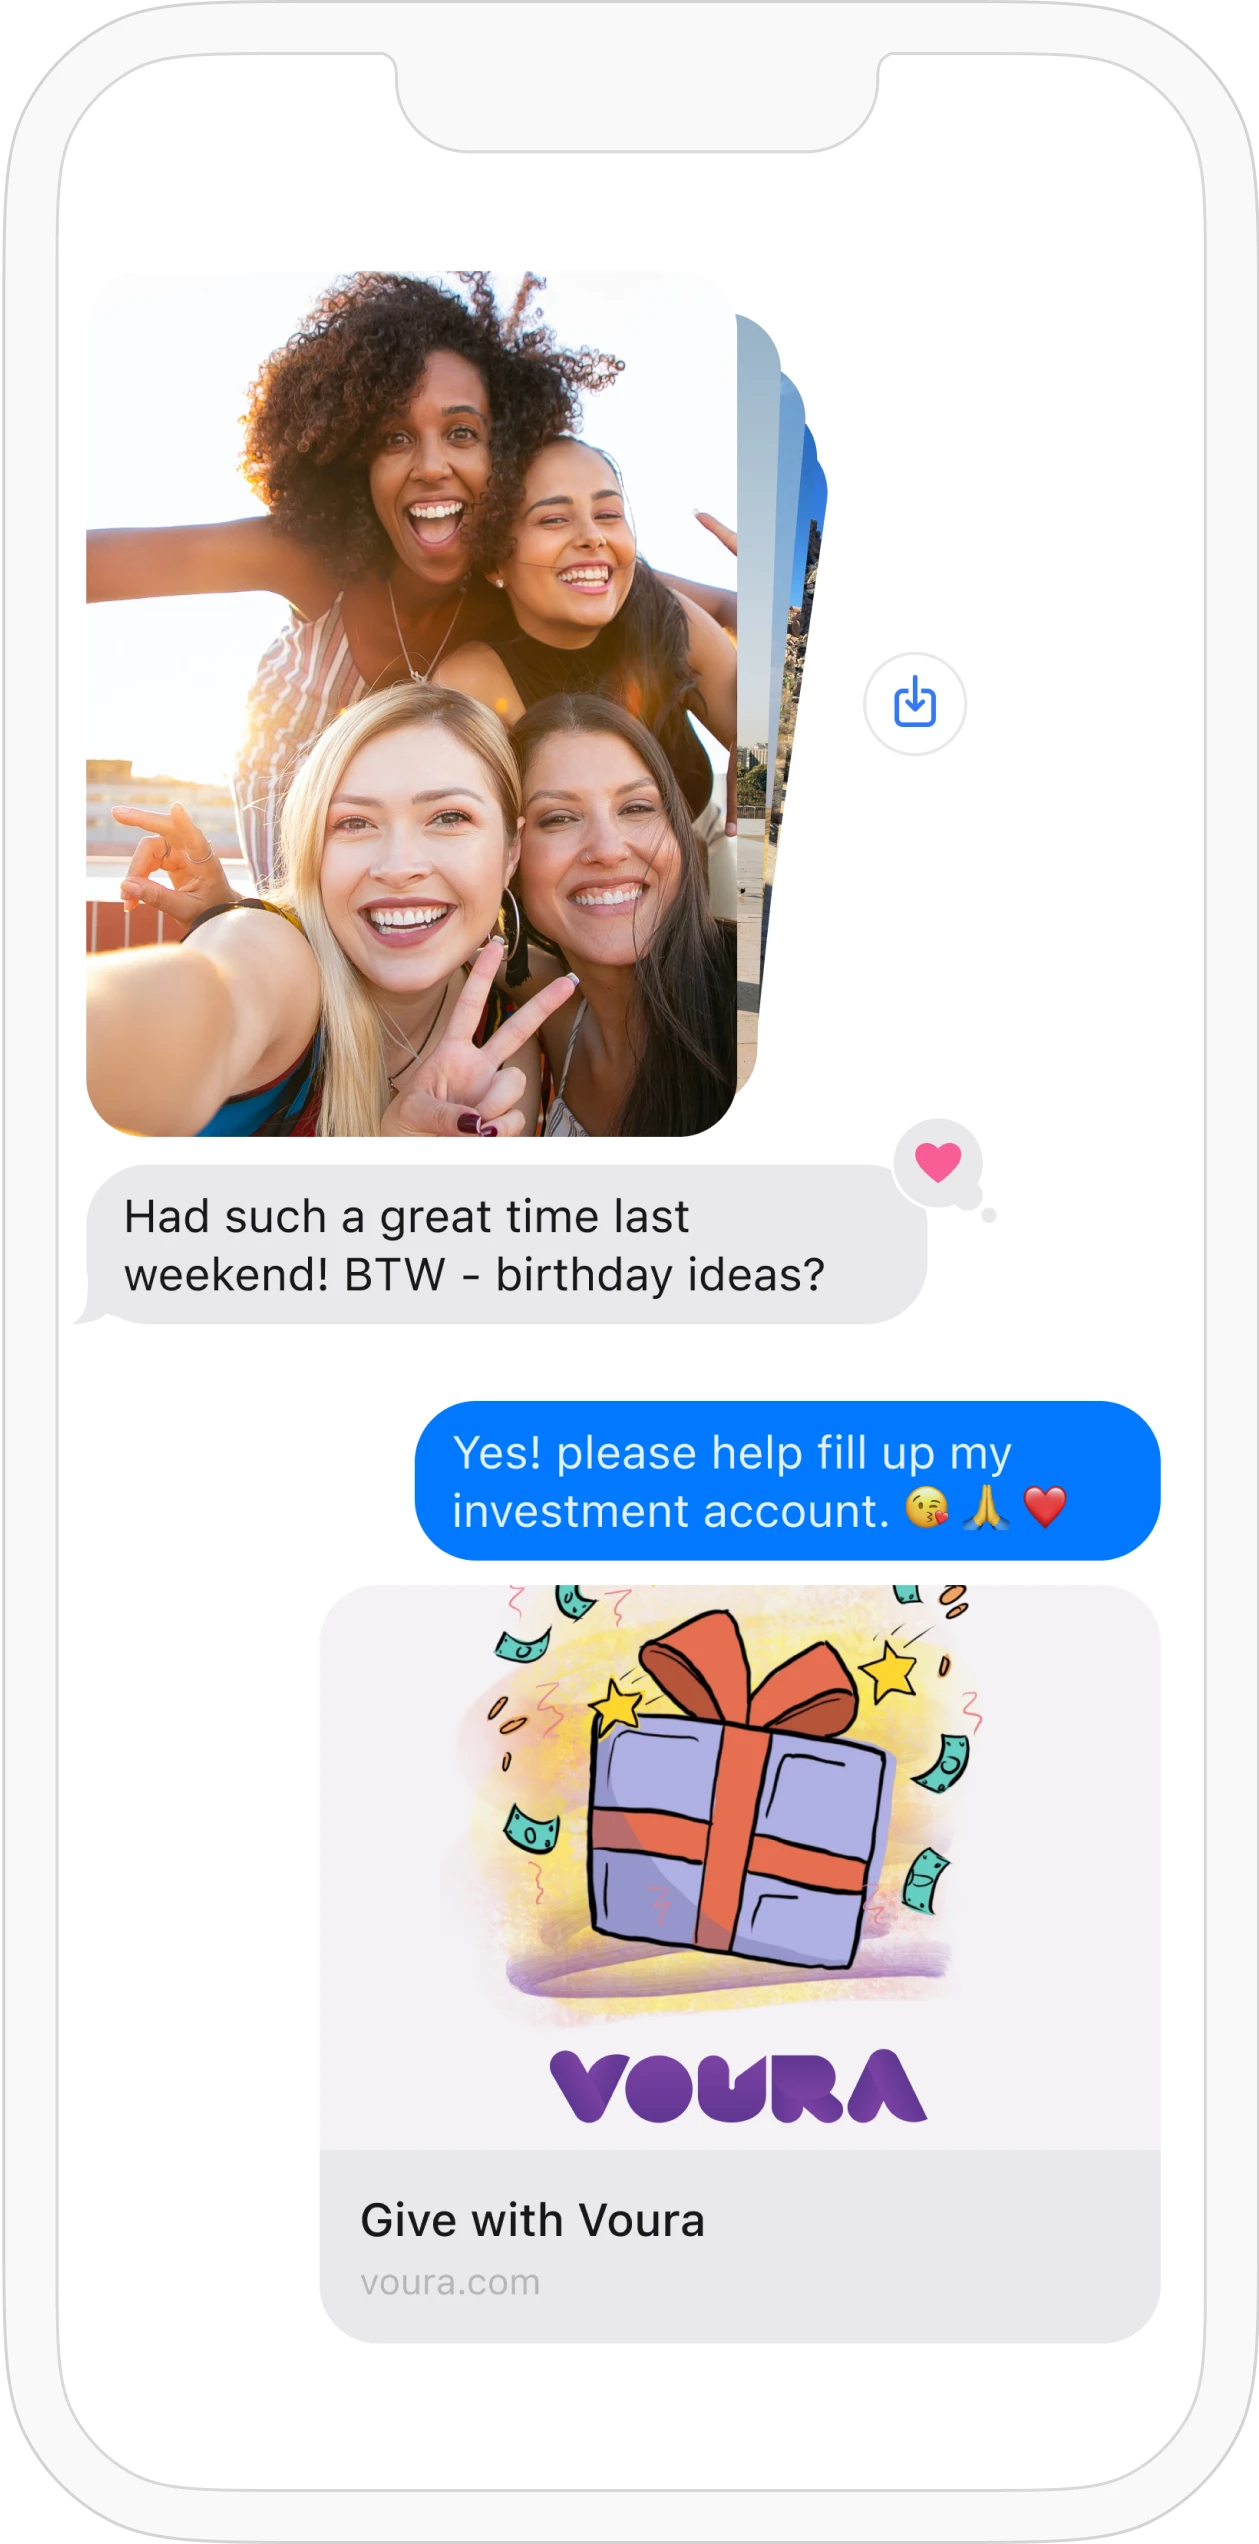 Mobile phone showing text message chat; first user sent photos and said 'Had such a great time last weekend! BTW - birthday ideas?' and user responded 'Yes! please help fill up my investment account.' followed by a link to Give with Voura.